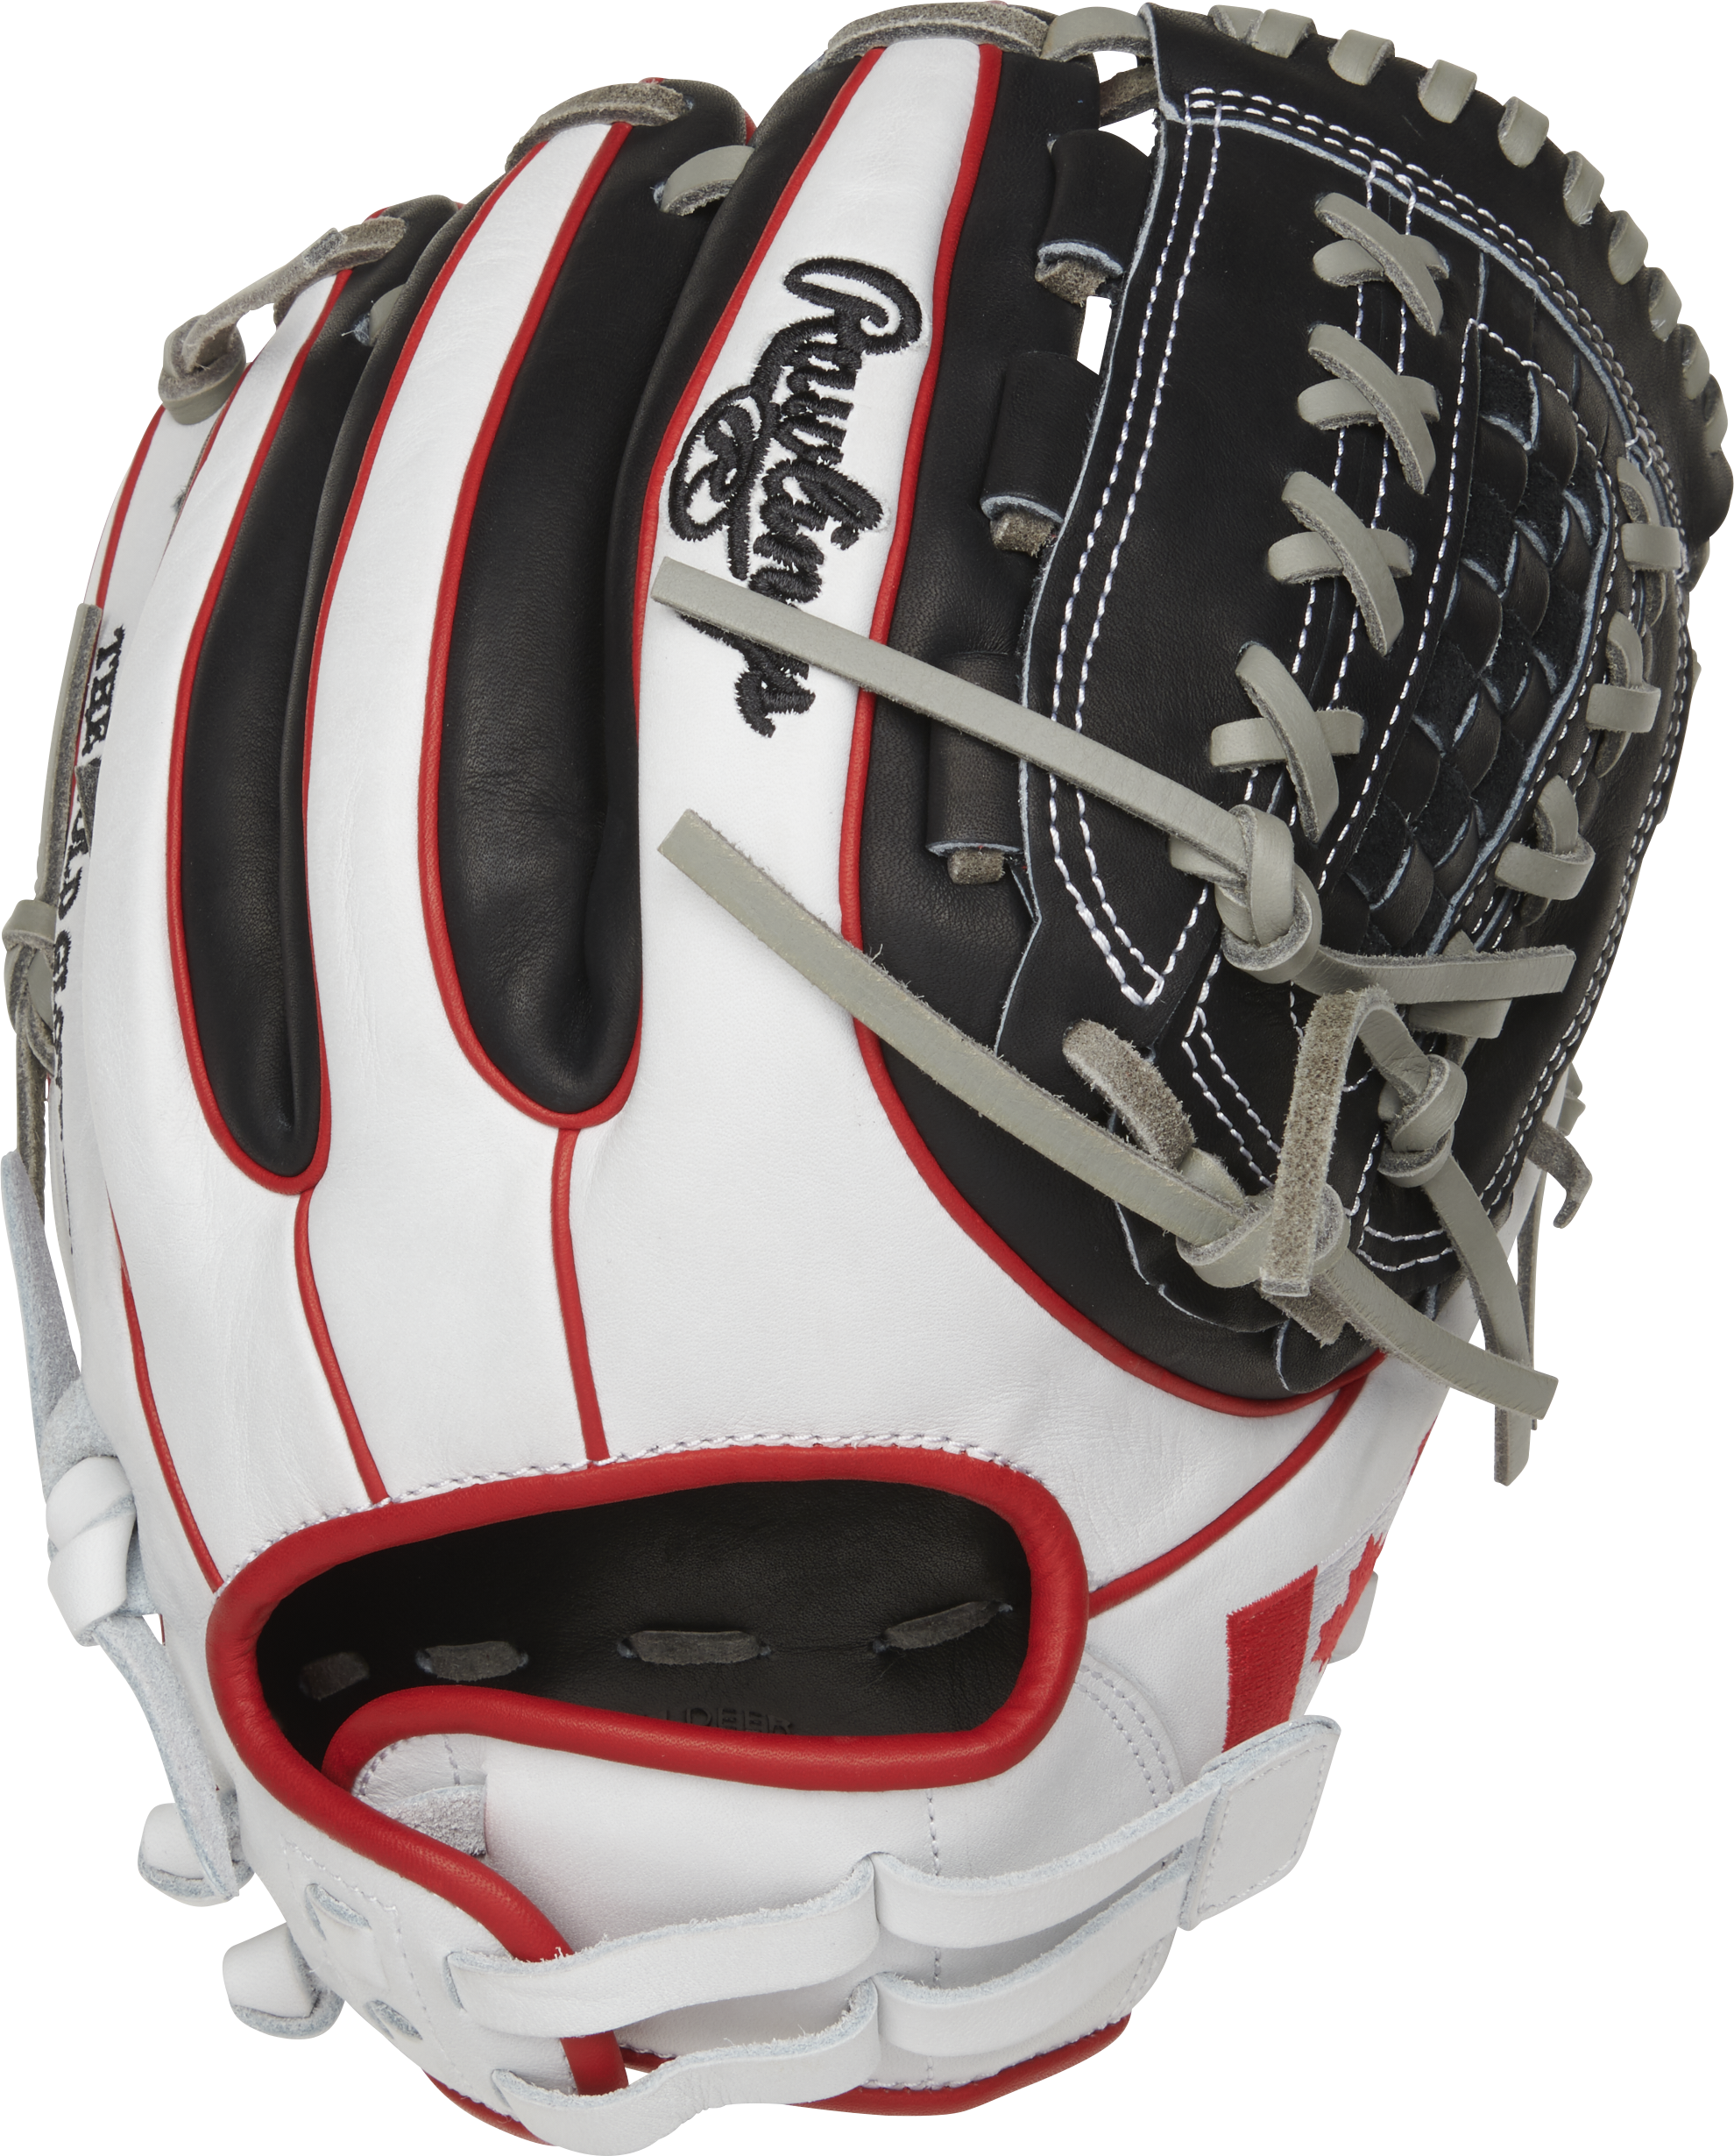 Rawlings Heart of the Hide Canada Softball Glove | Special Edition | Midway Sports.